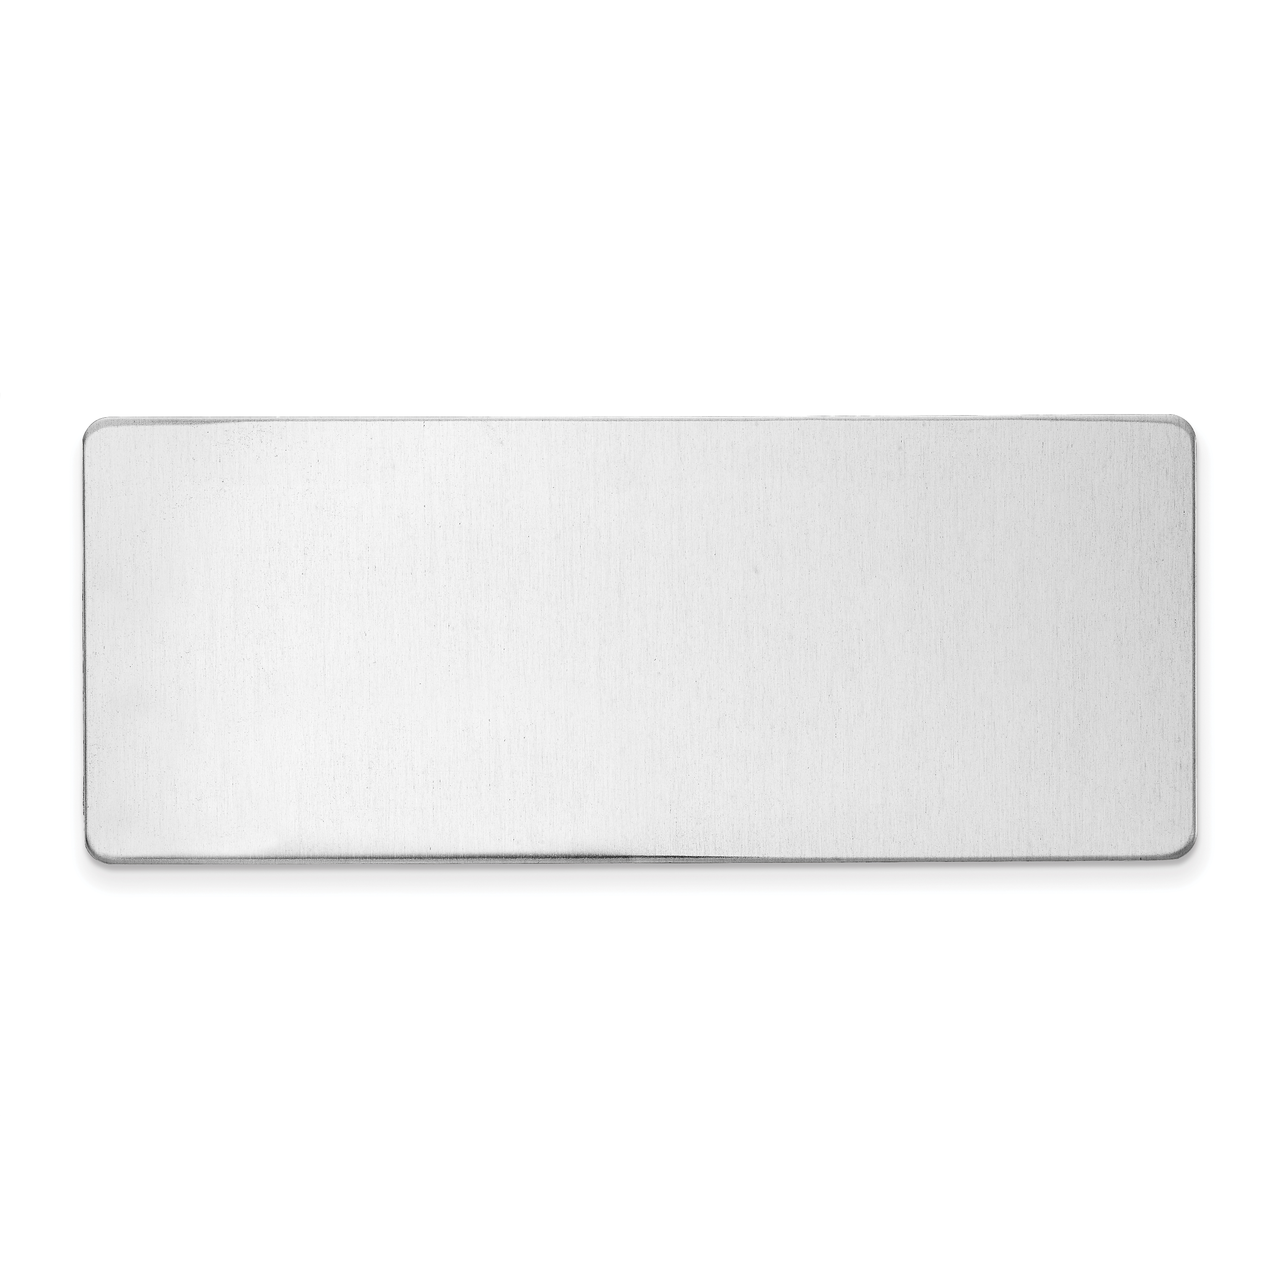 1 X 2 1 2 Aluminum Single Plate Polished by Jere Engravable